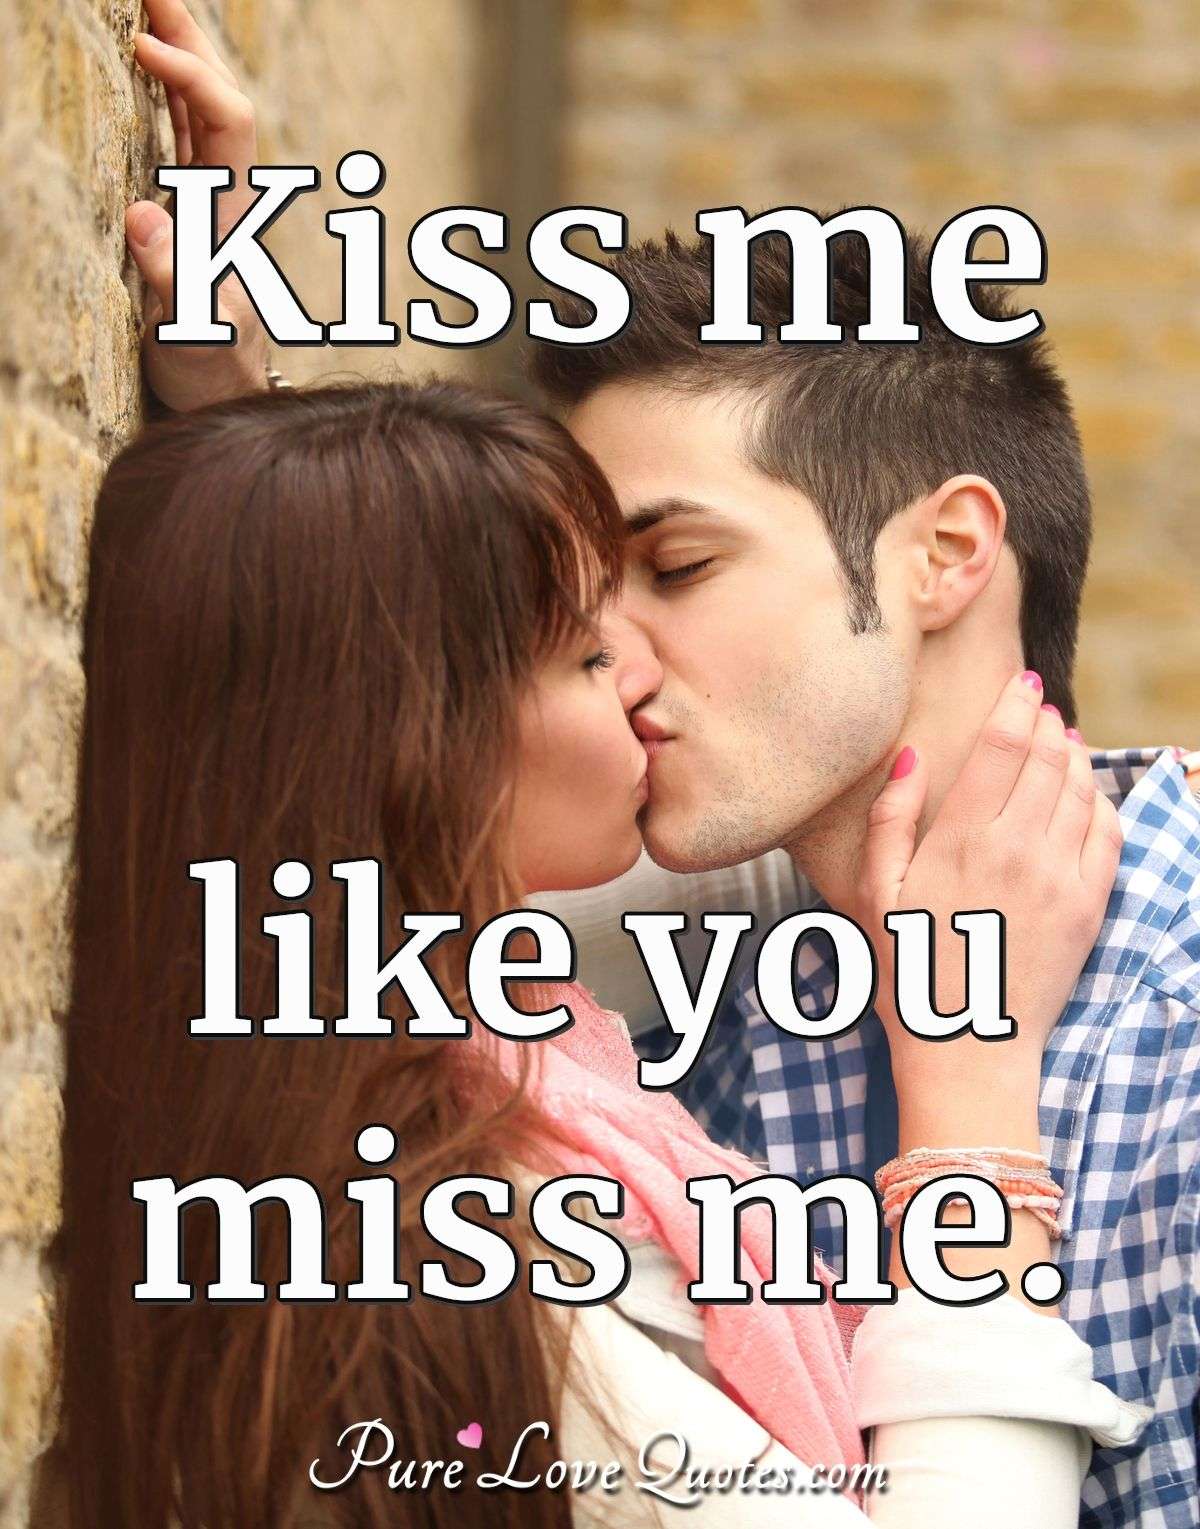 Kiss miss and 160 Cute